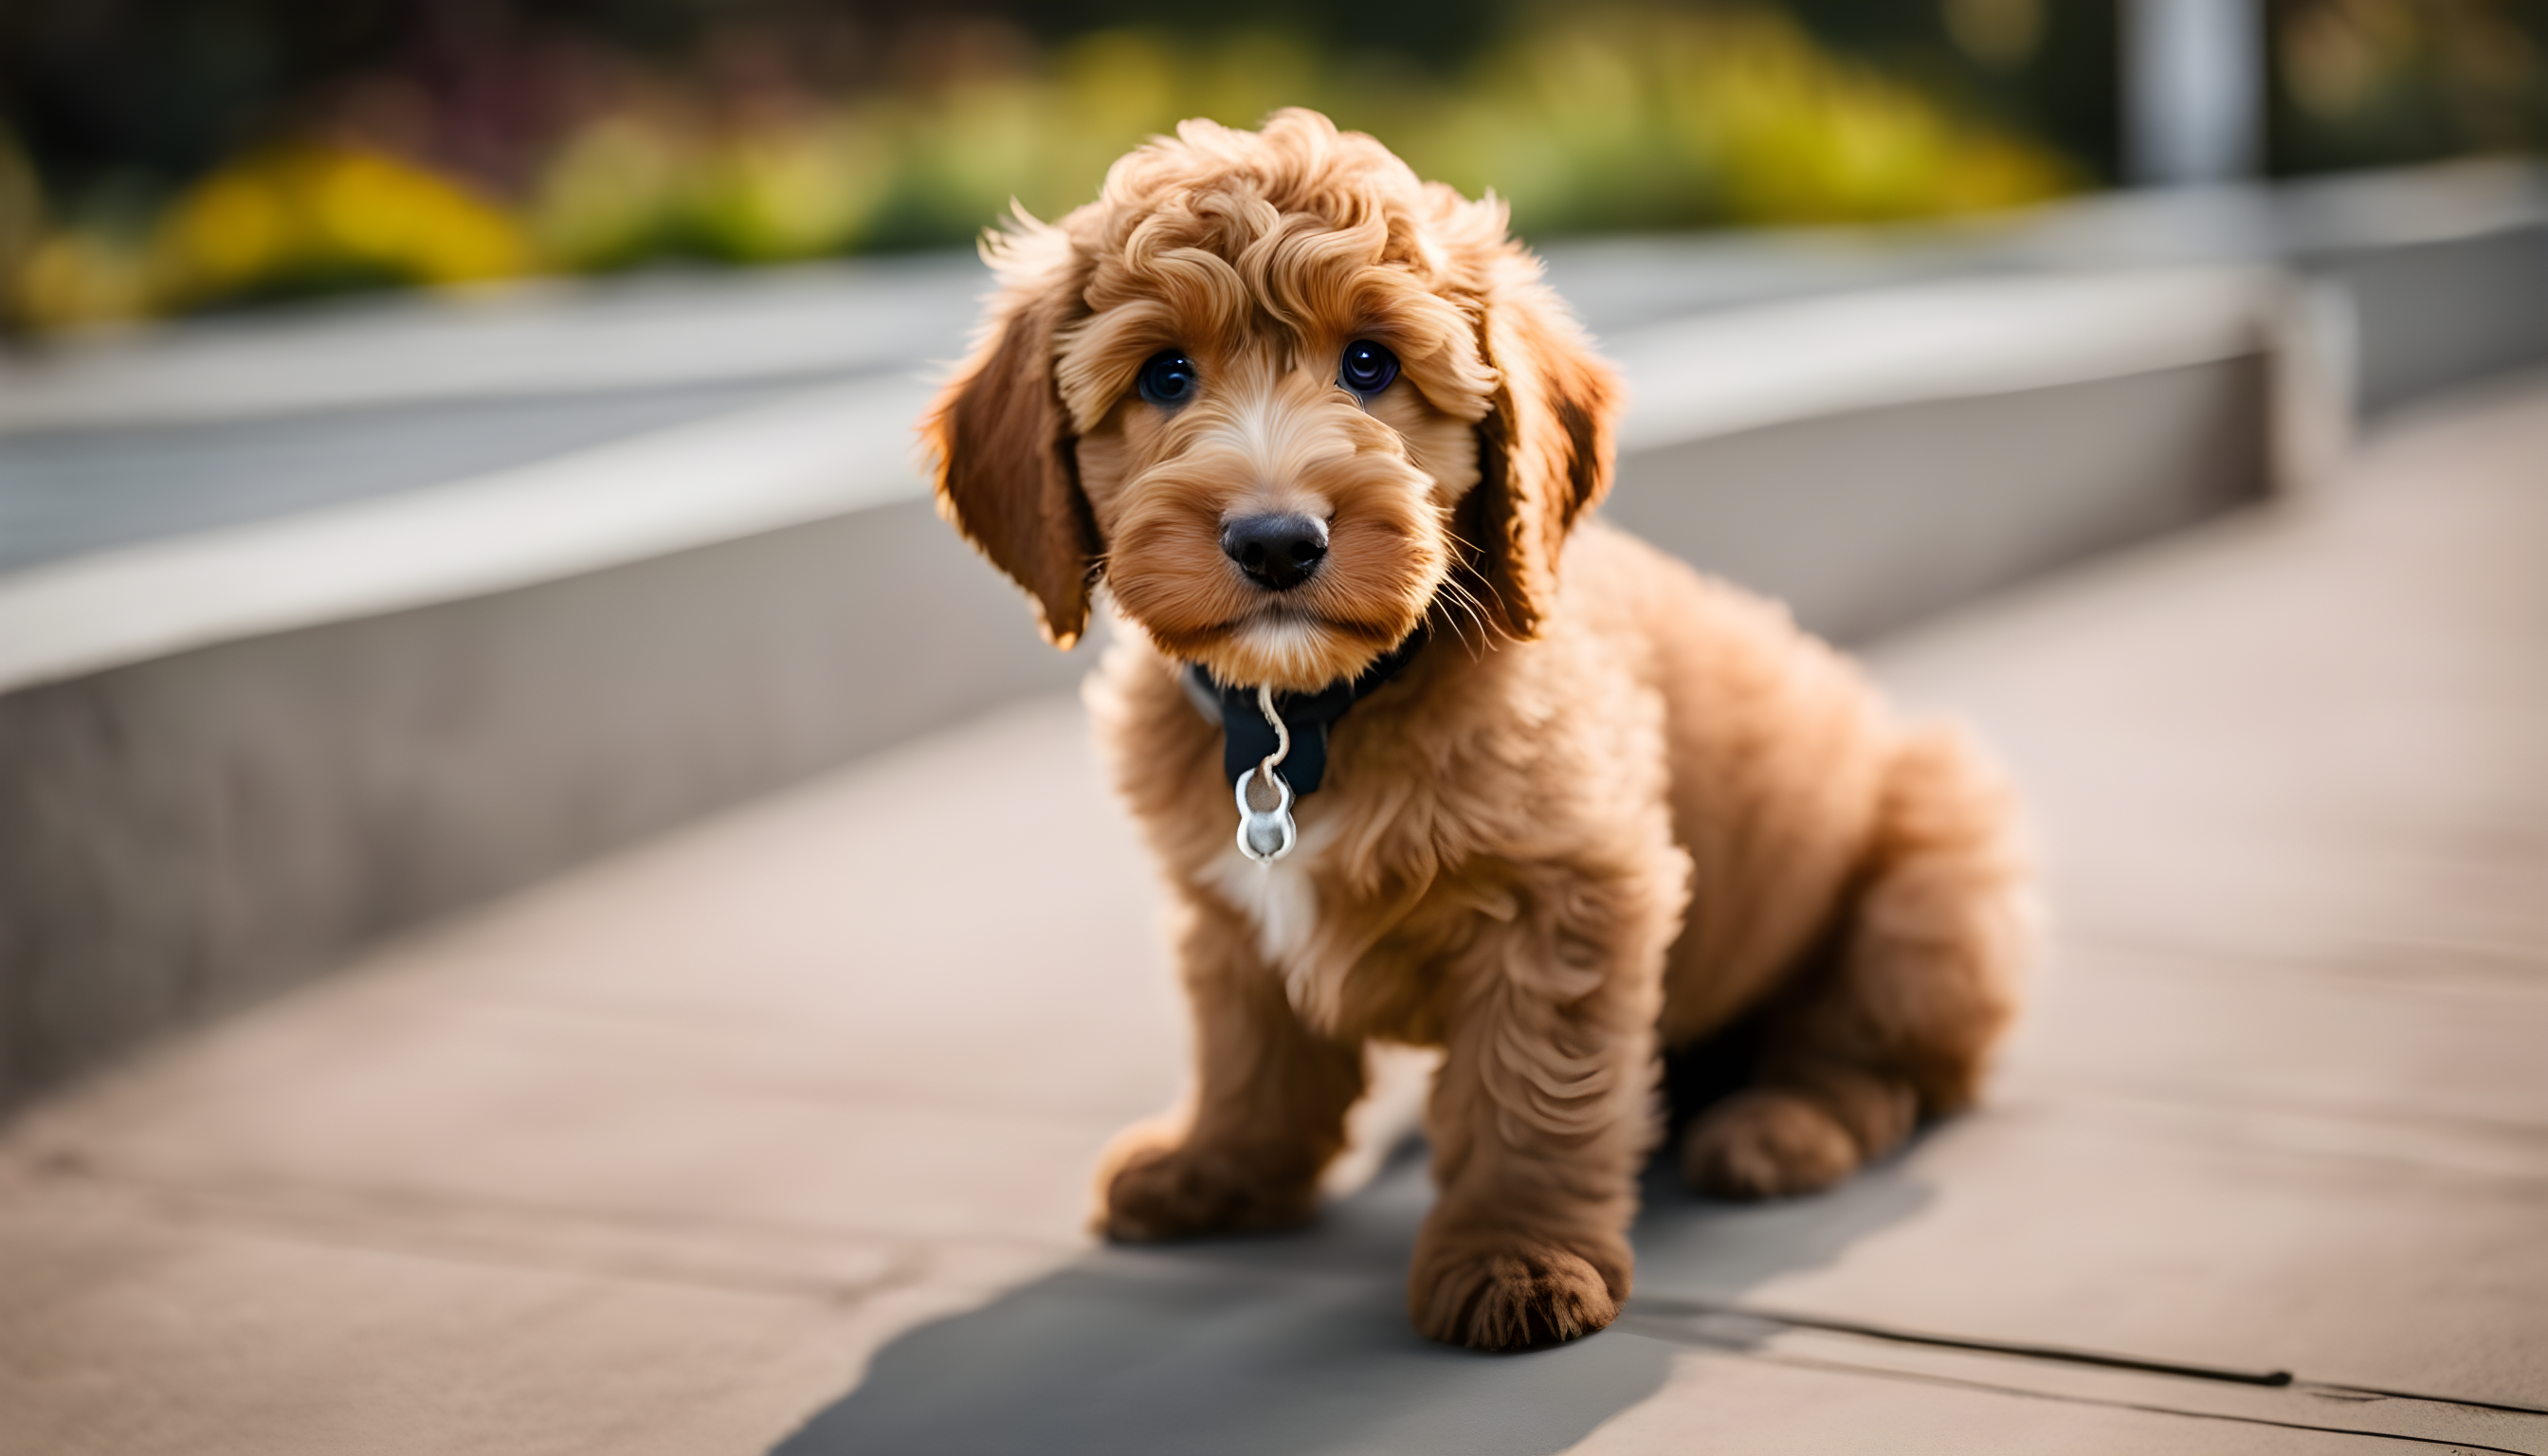 A cute Labradoodle puppy looking directly into the camera